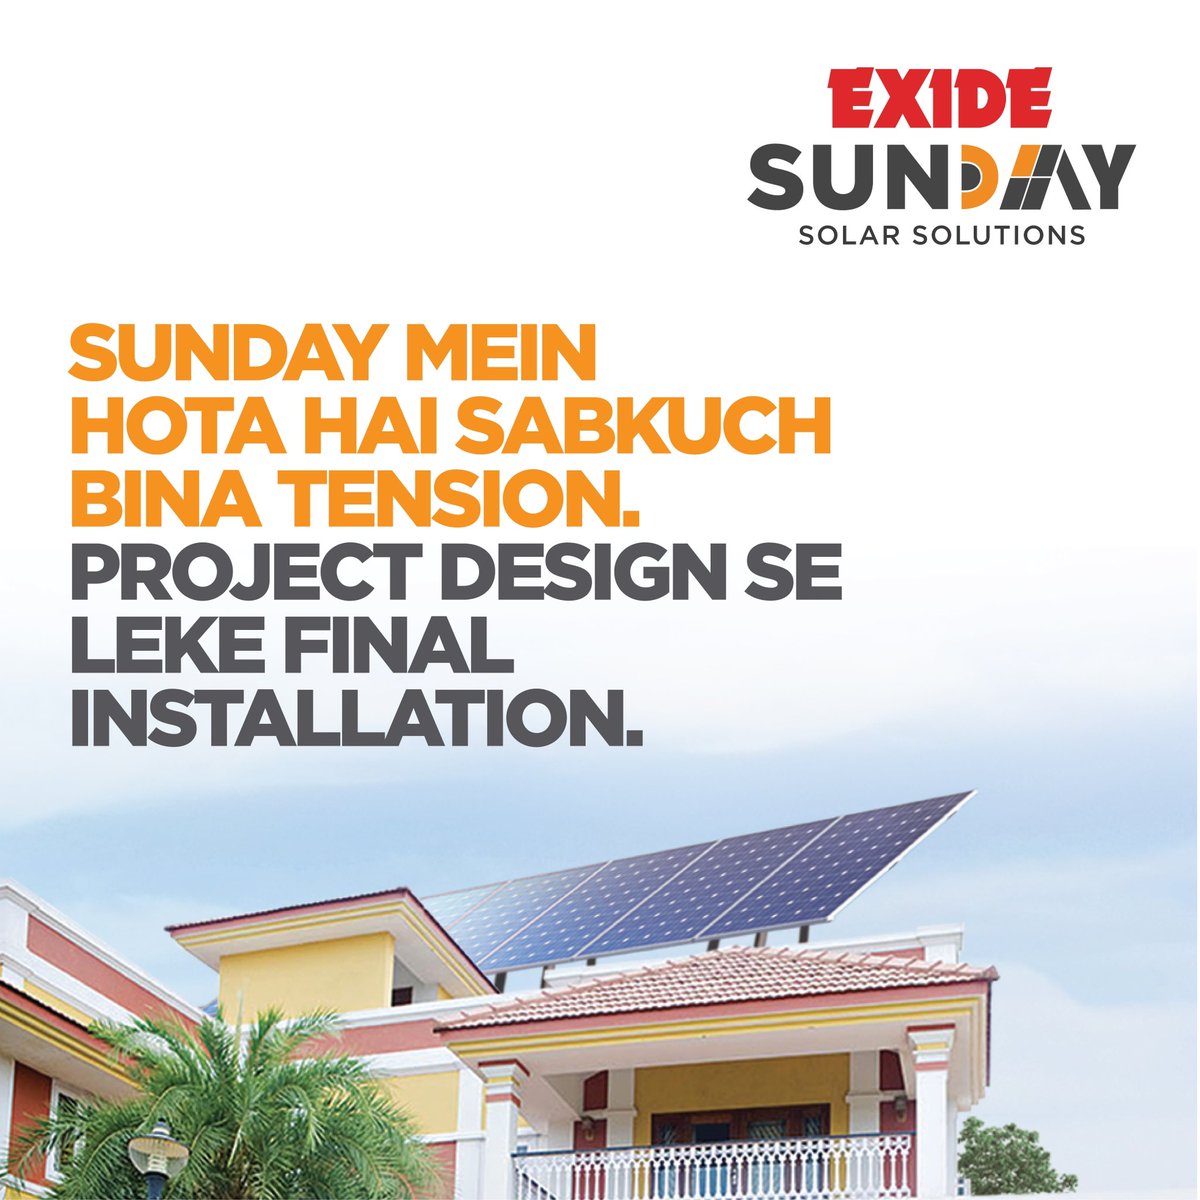 Experience the hassle-free process of going solar with Exide Sunday rooftop solar solutions. Just click on the link to know more- from project designing to installation. Get Exide Sunday, Aaraam Se! solar.exideindustries.com
 #SundayLiving #Exide #ExideSolar #sustainableenergy